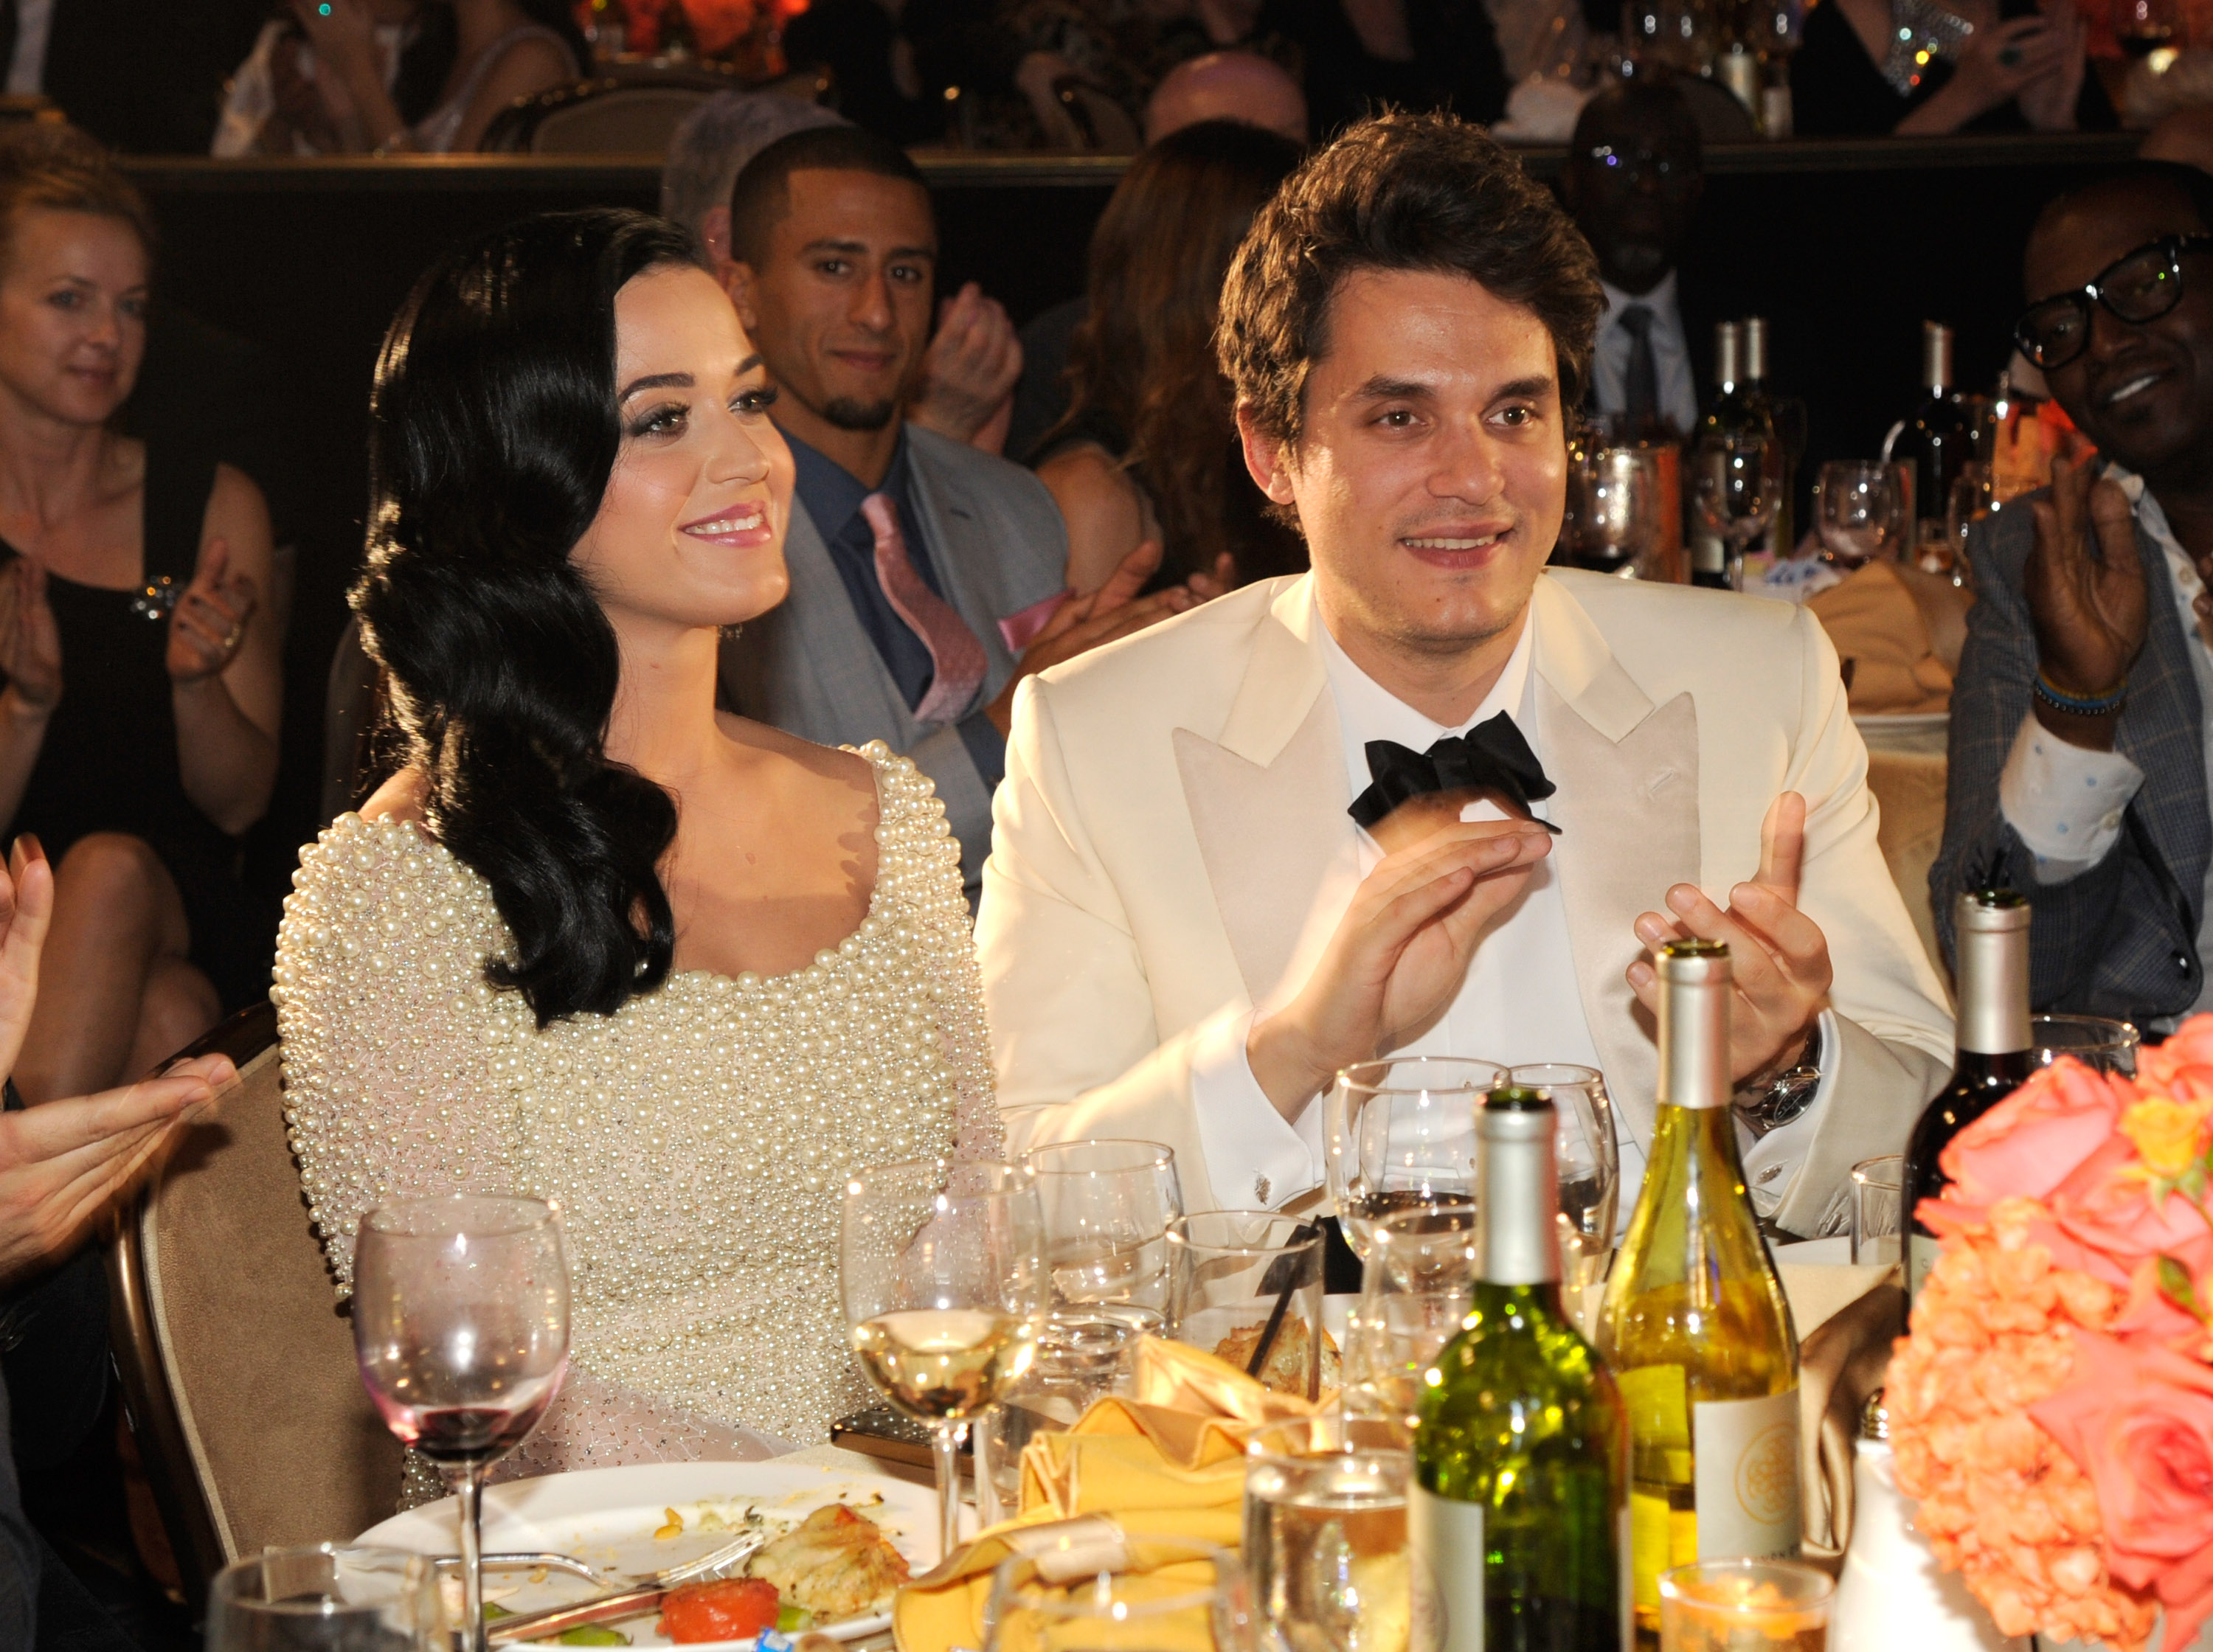 Katy Perry and John Mayer at the Lunt-Fontanne Theatre on December 12, 2012 in New York City | Source: Getty Images